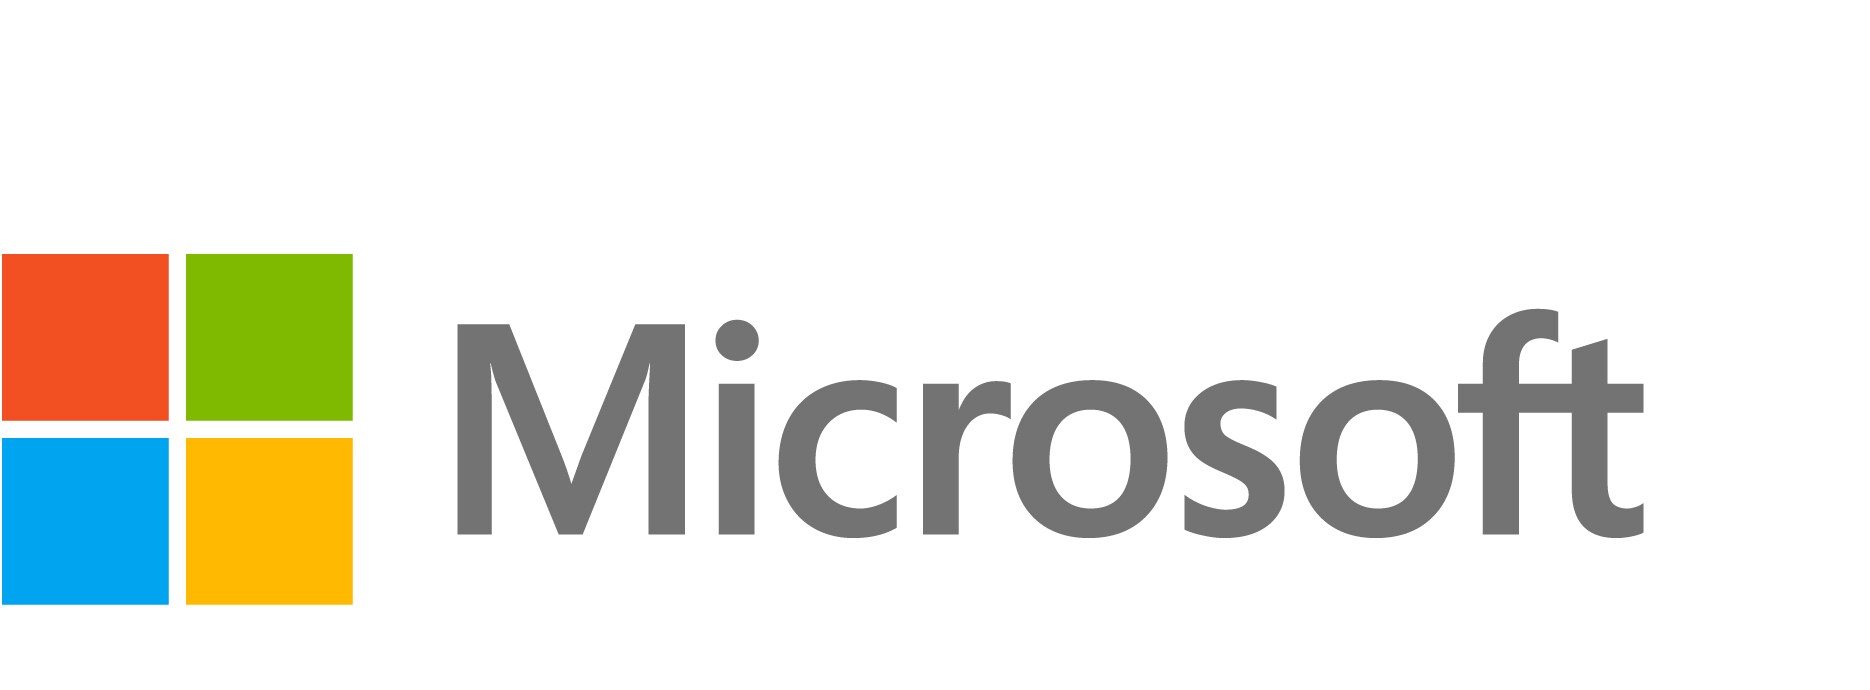 MS PROJECT SERVER 2019 USER CAL NCE